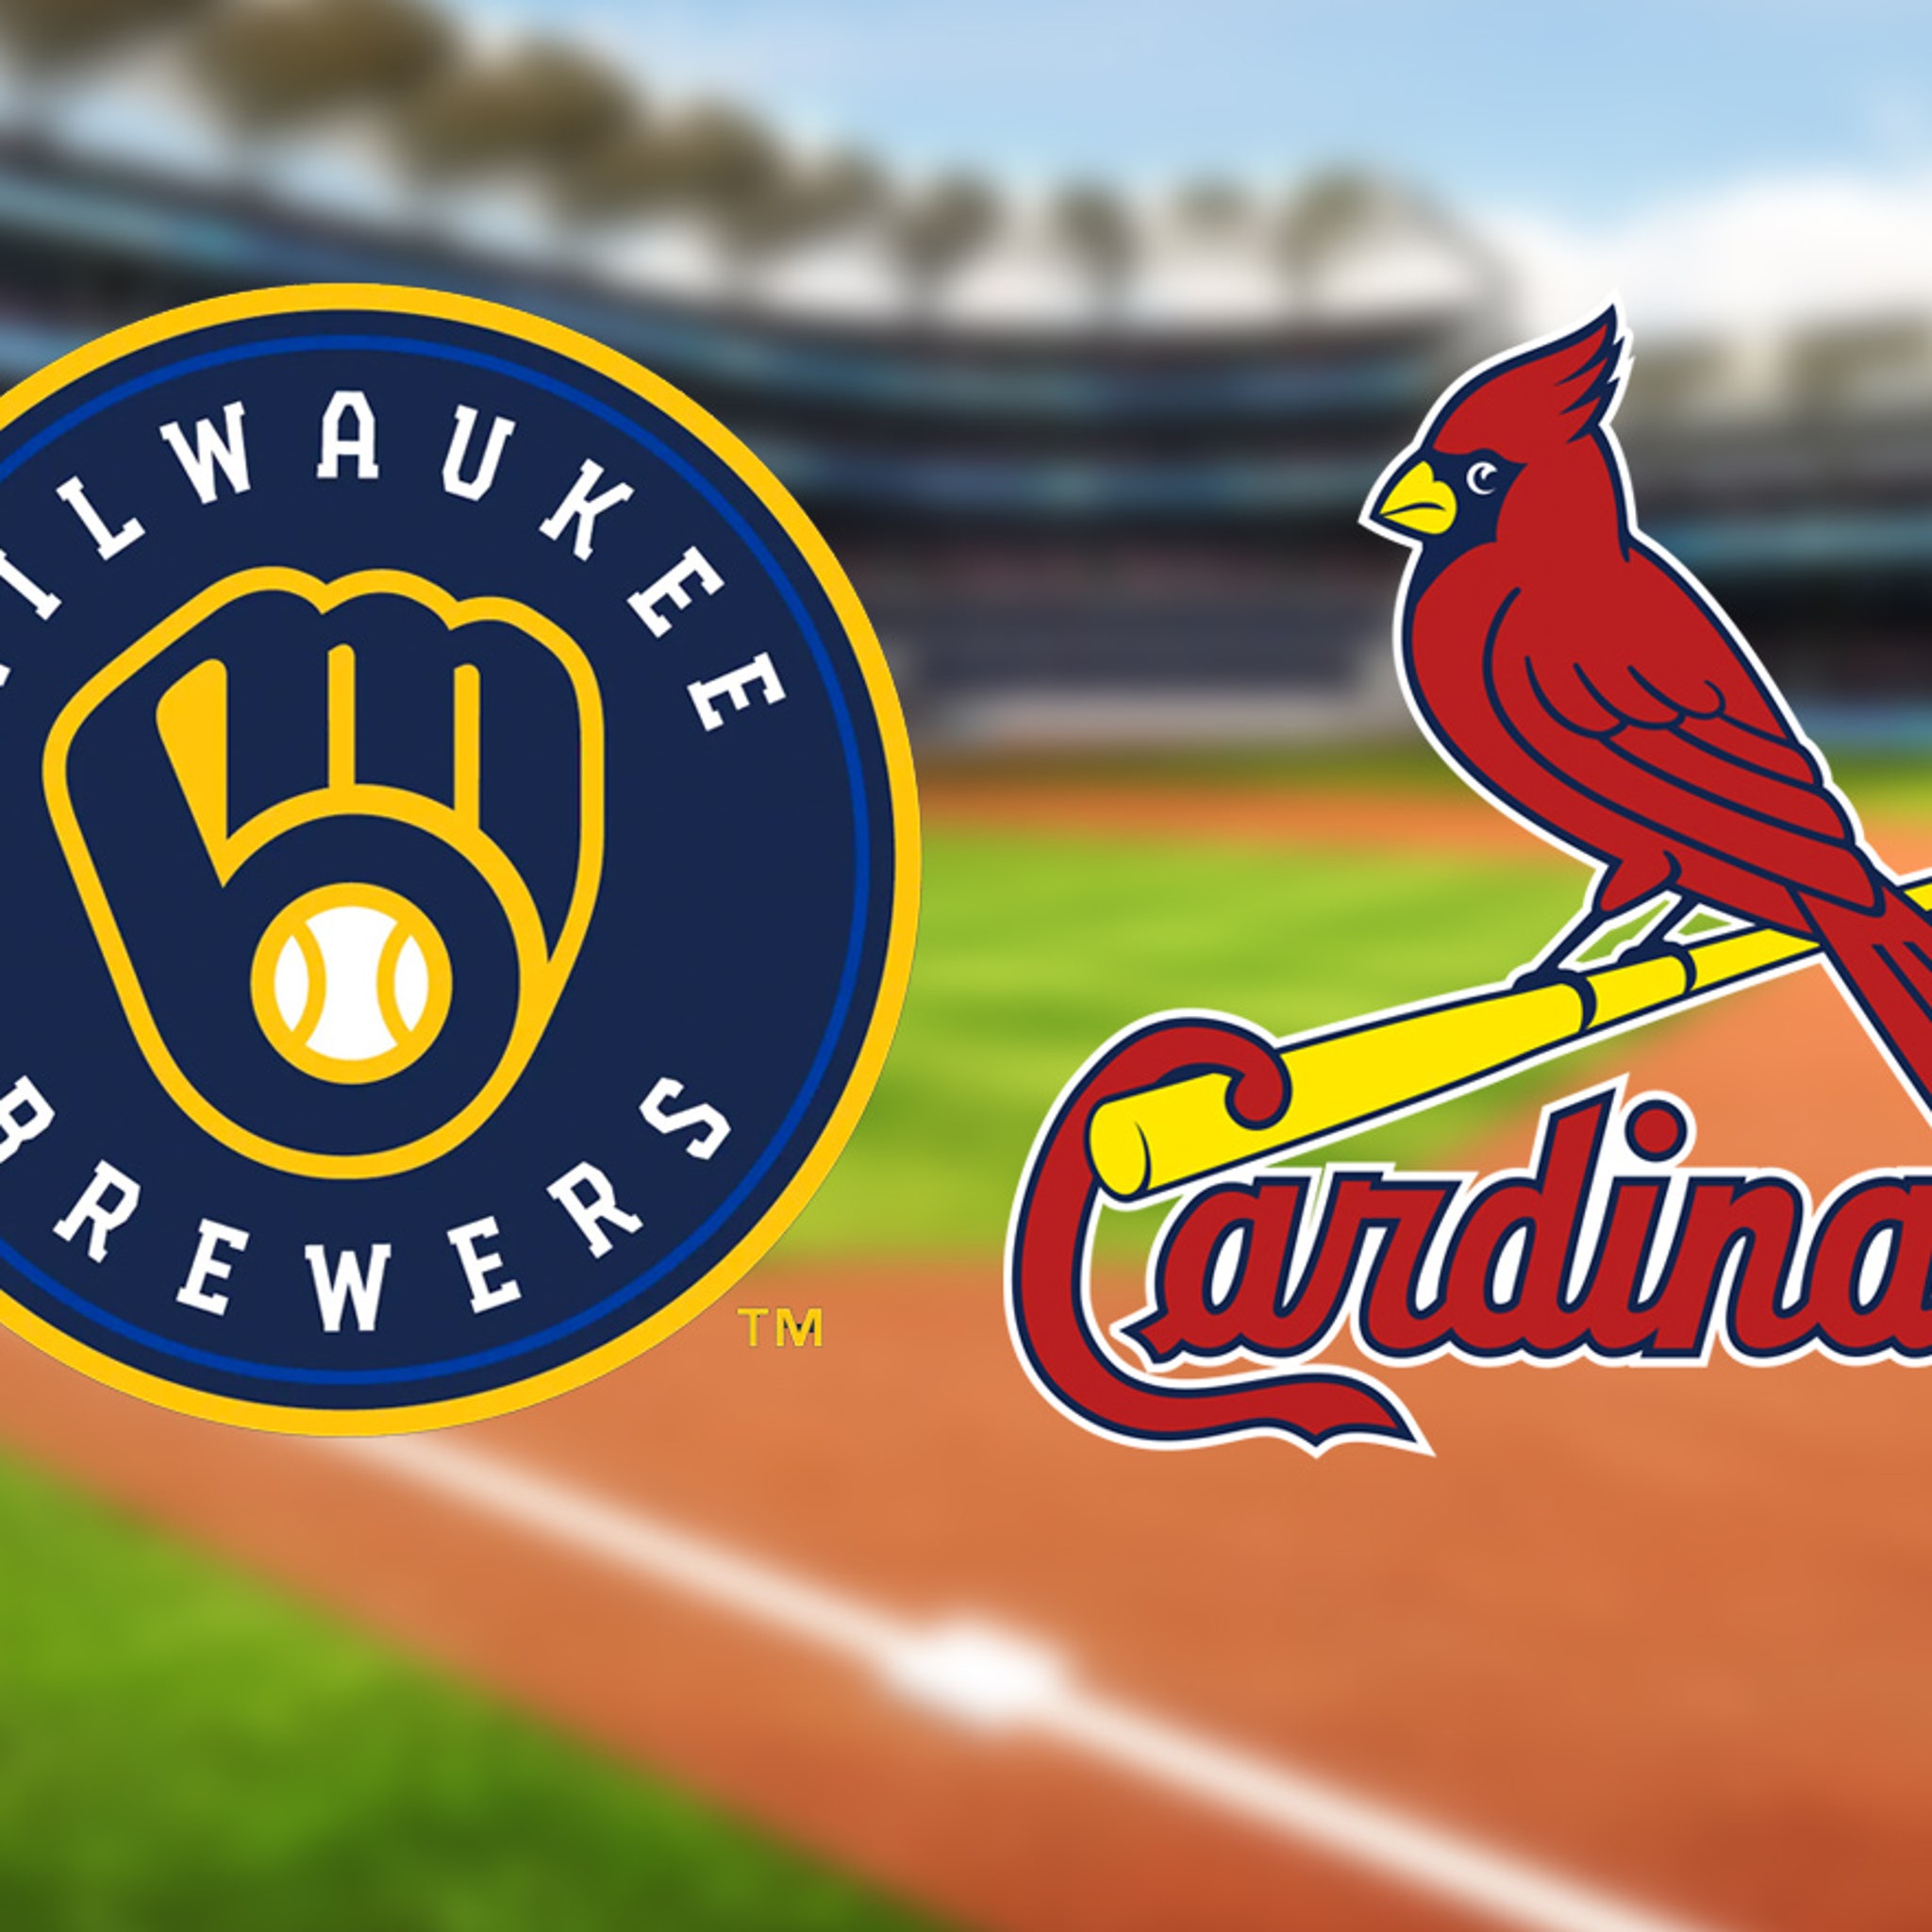 Cardinals versus Brewers postponed game due to Covid-19